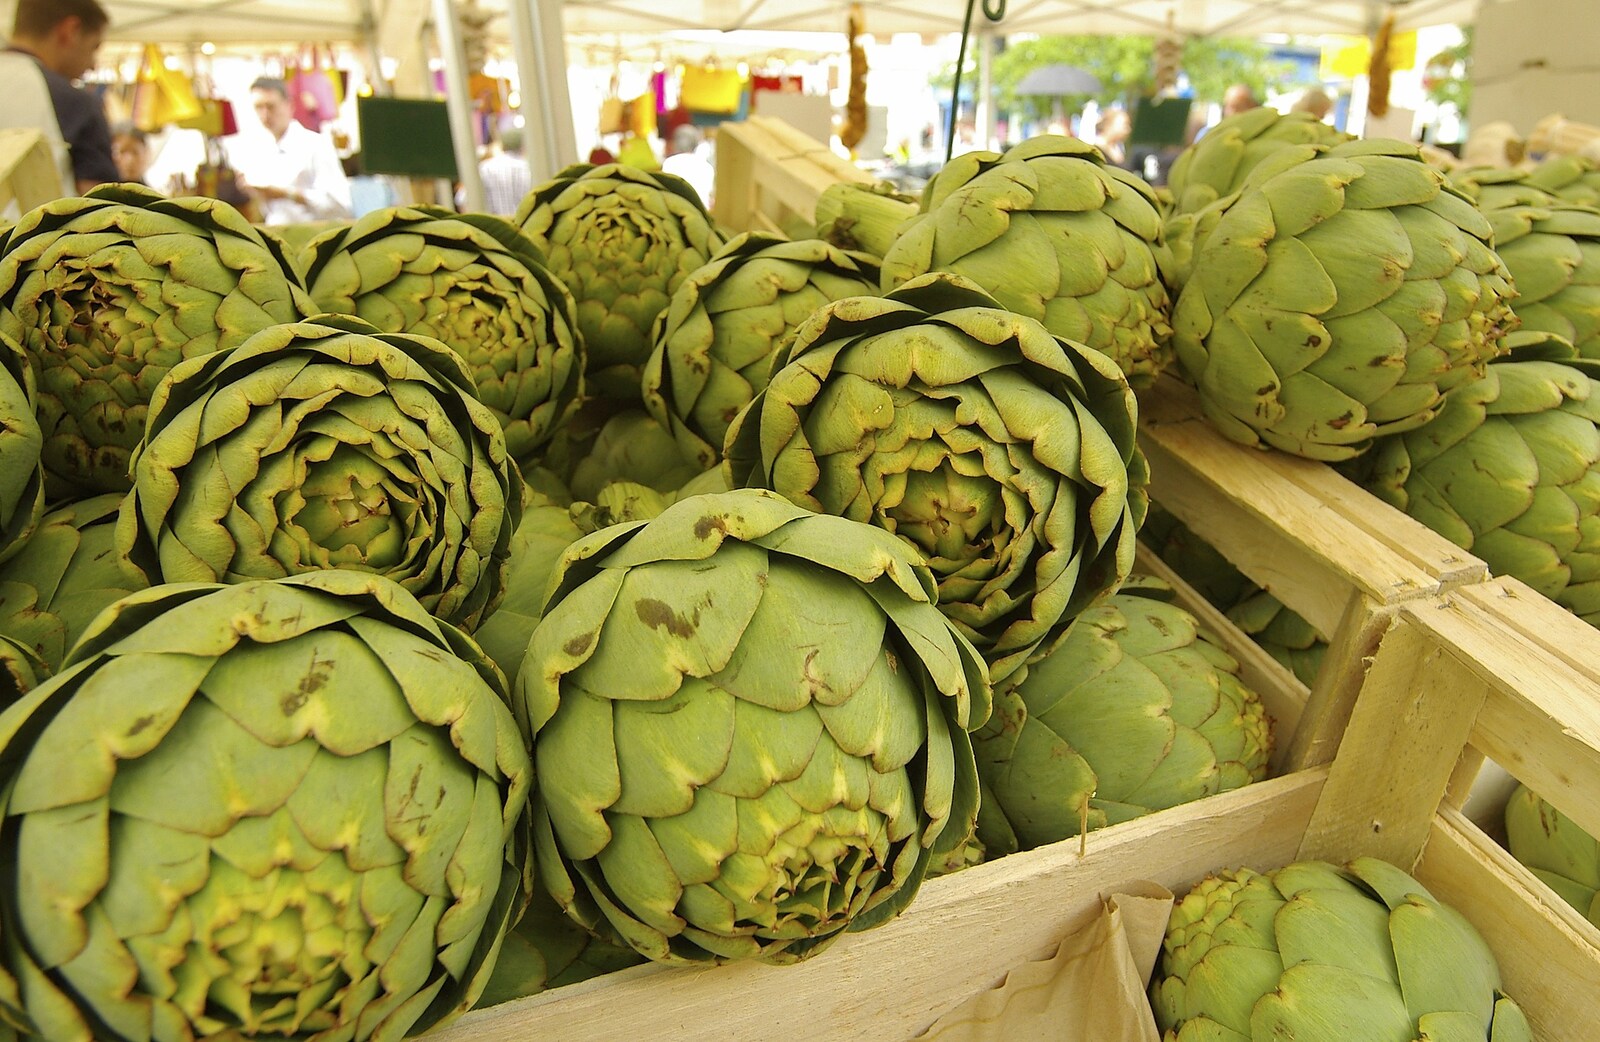 Globe artichokes from A French Market Visits, Diss, Norfolk - 24th June 2006